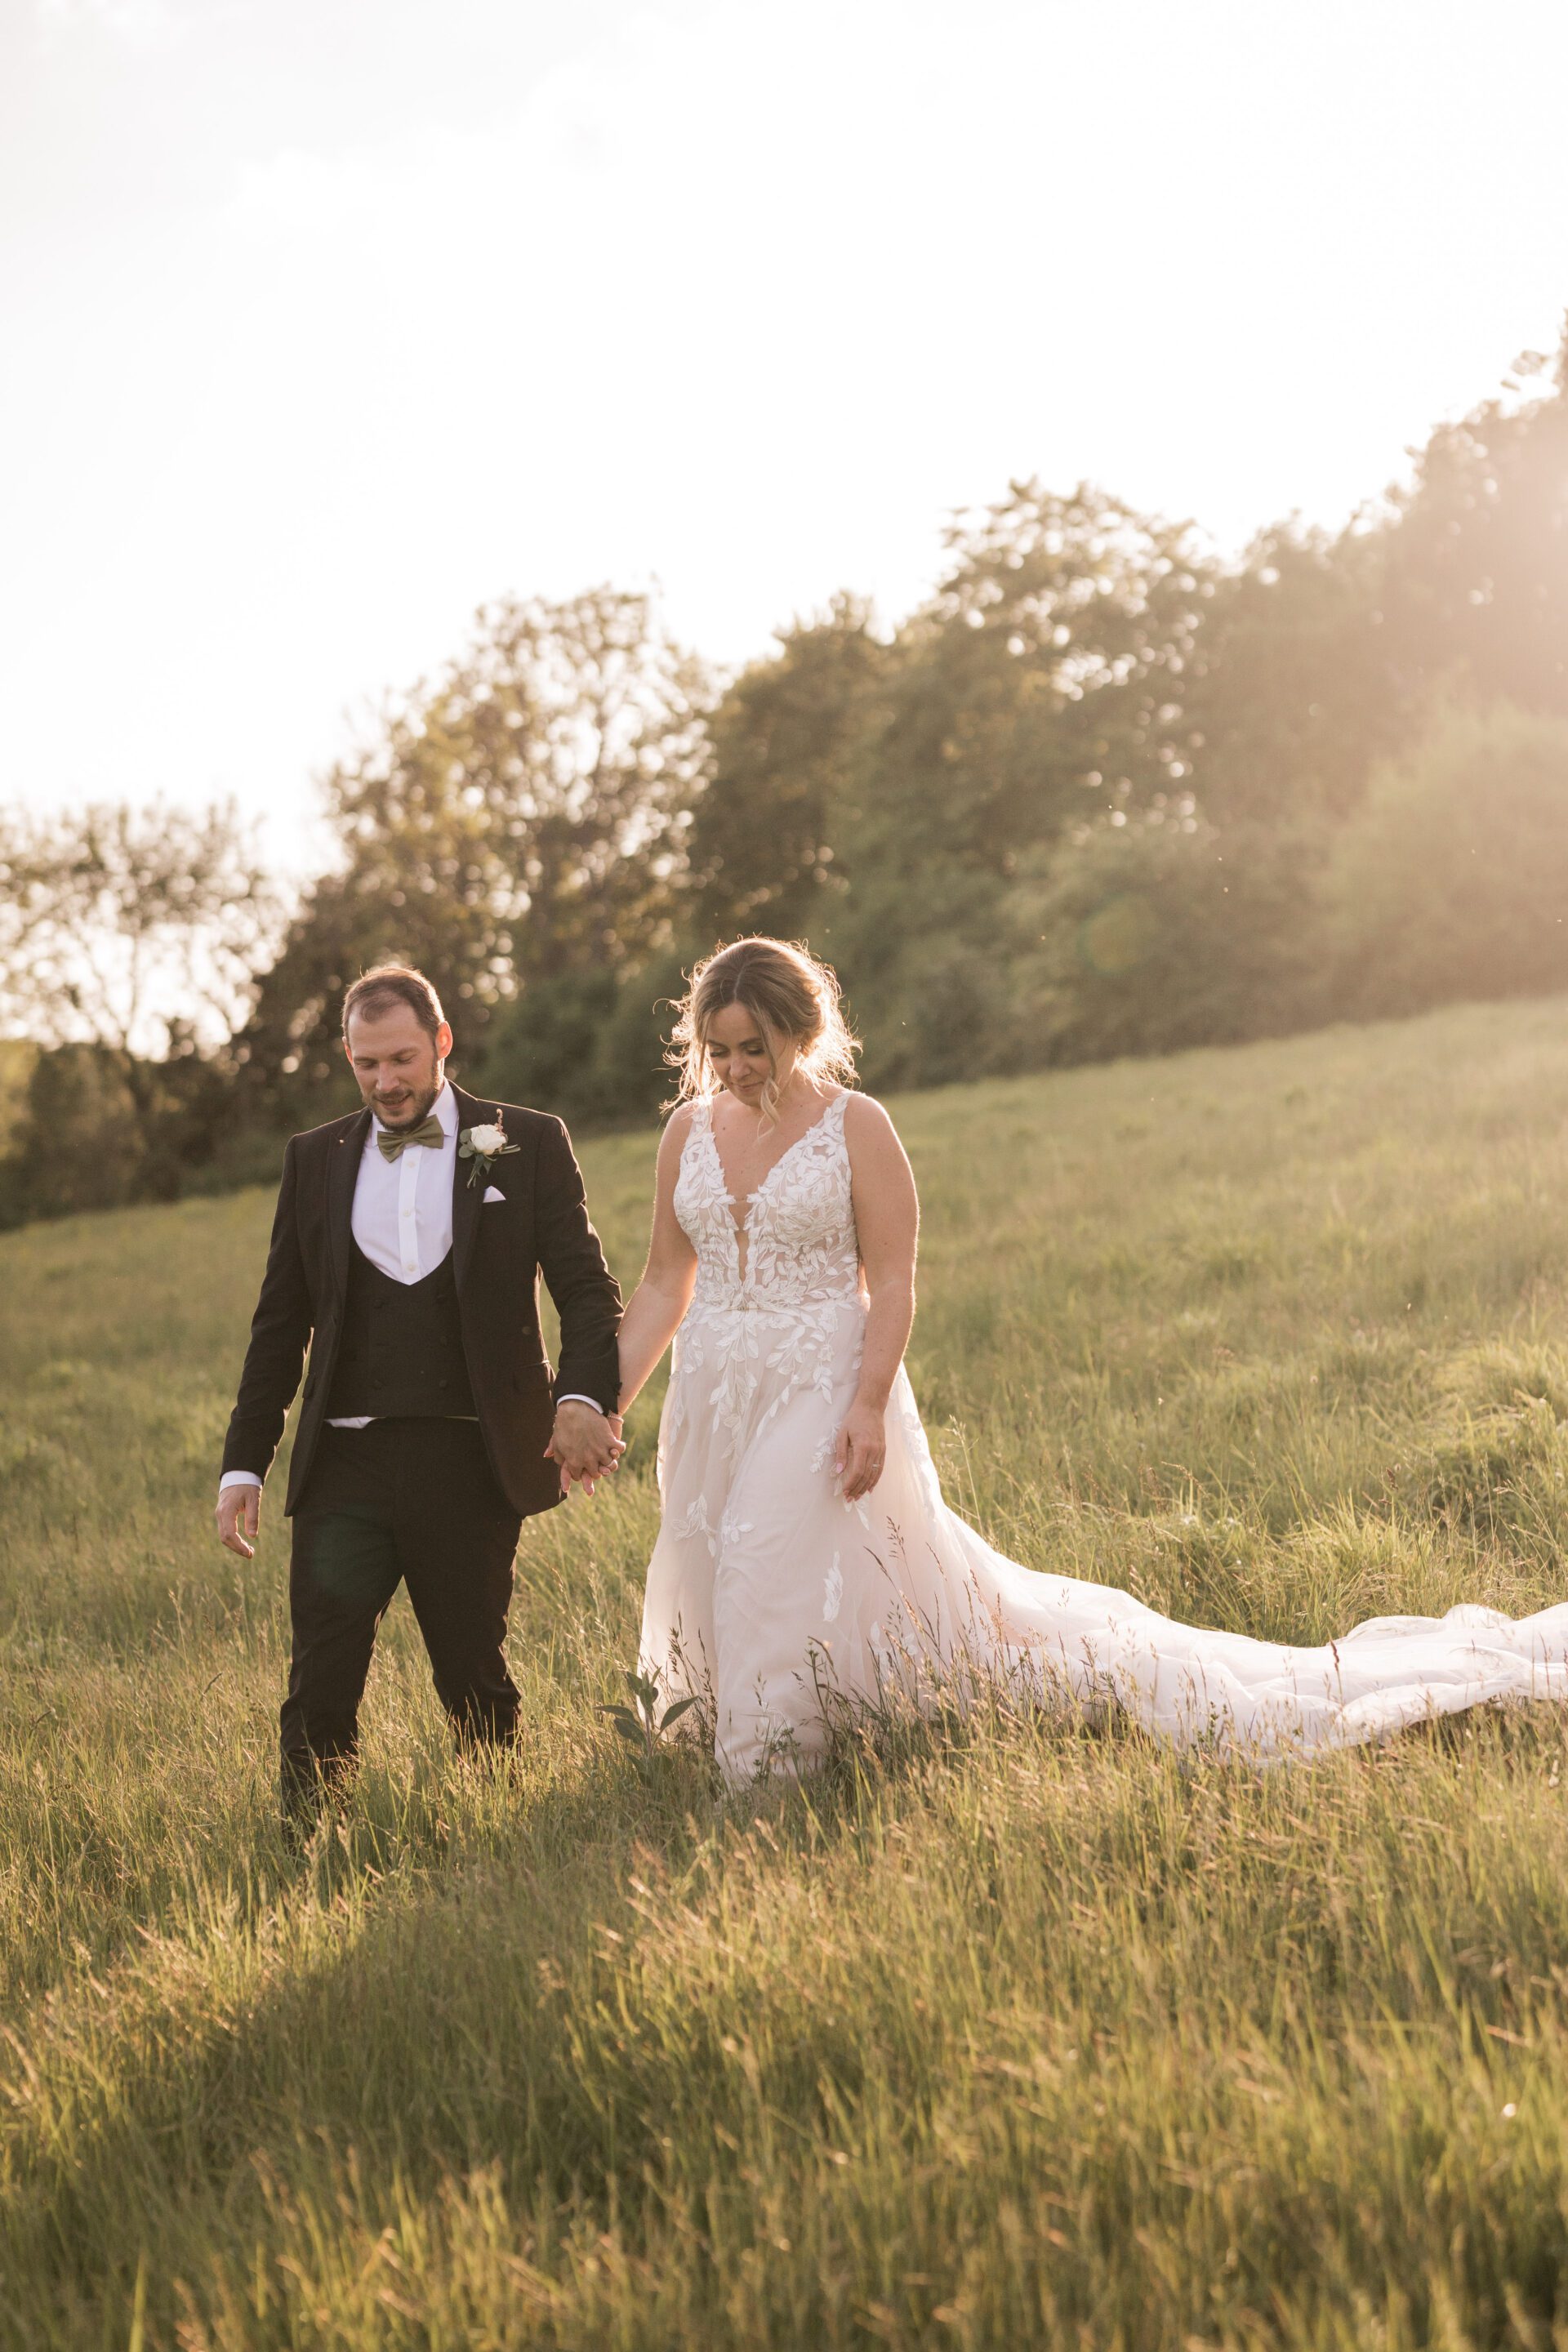 The bride and groom walk hand in hand during golden hour